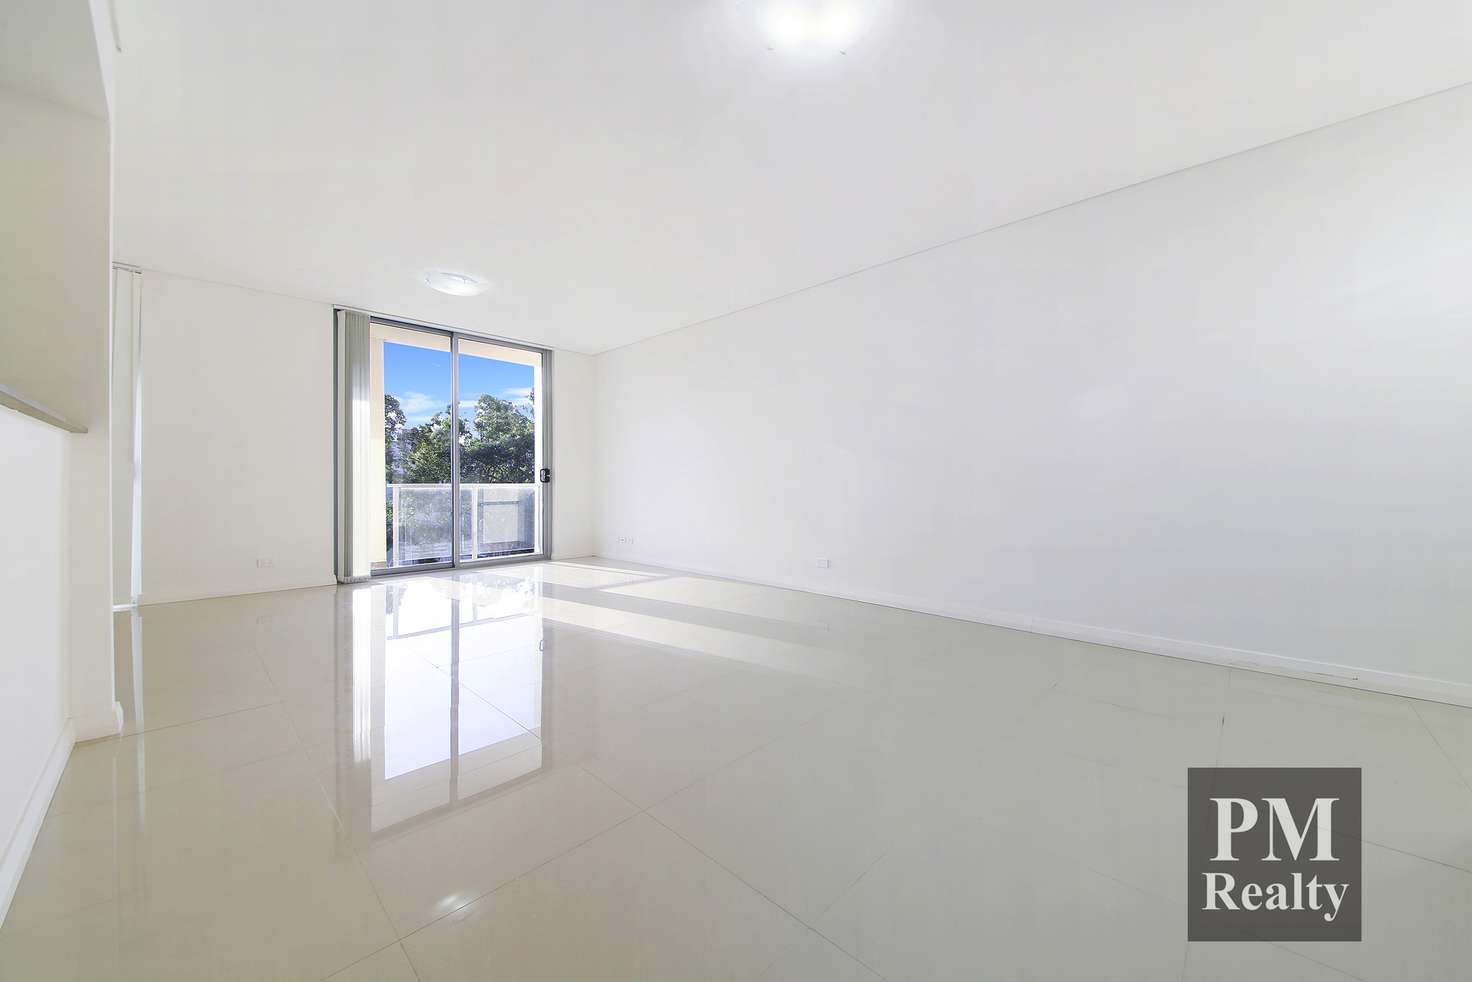 Main view of Homely apartment listing, 3403/42-44 Pemberton St, Botany NSW 2019